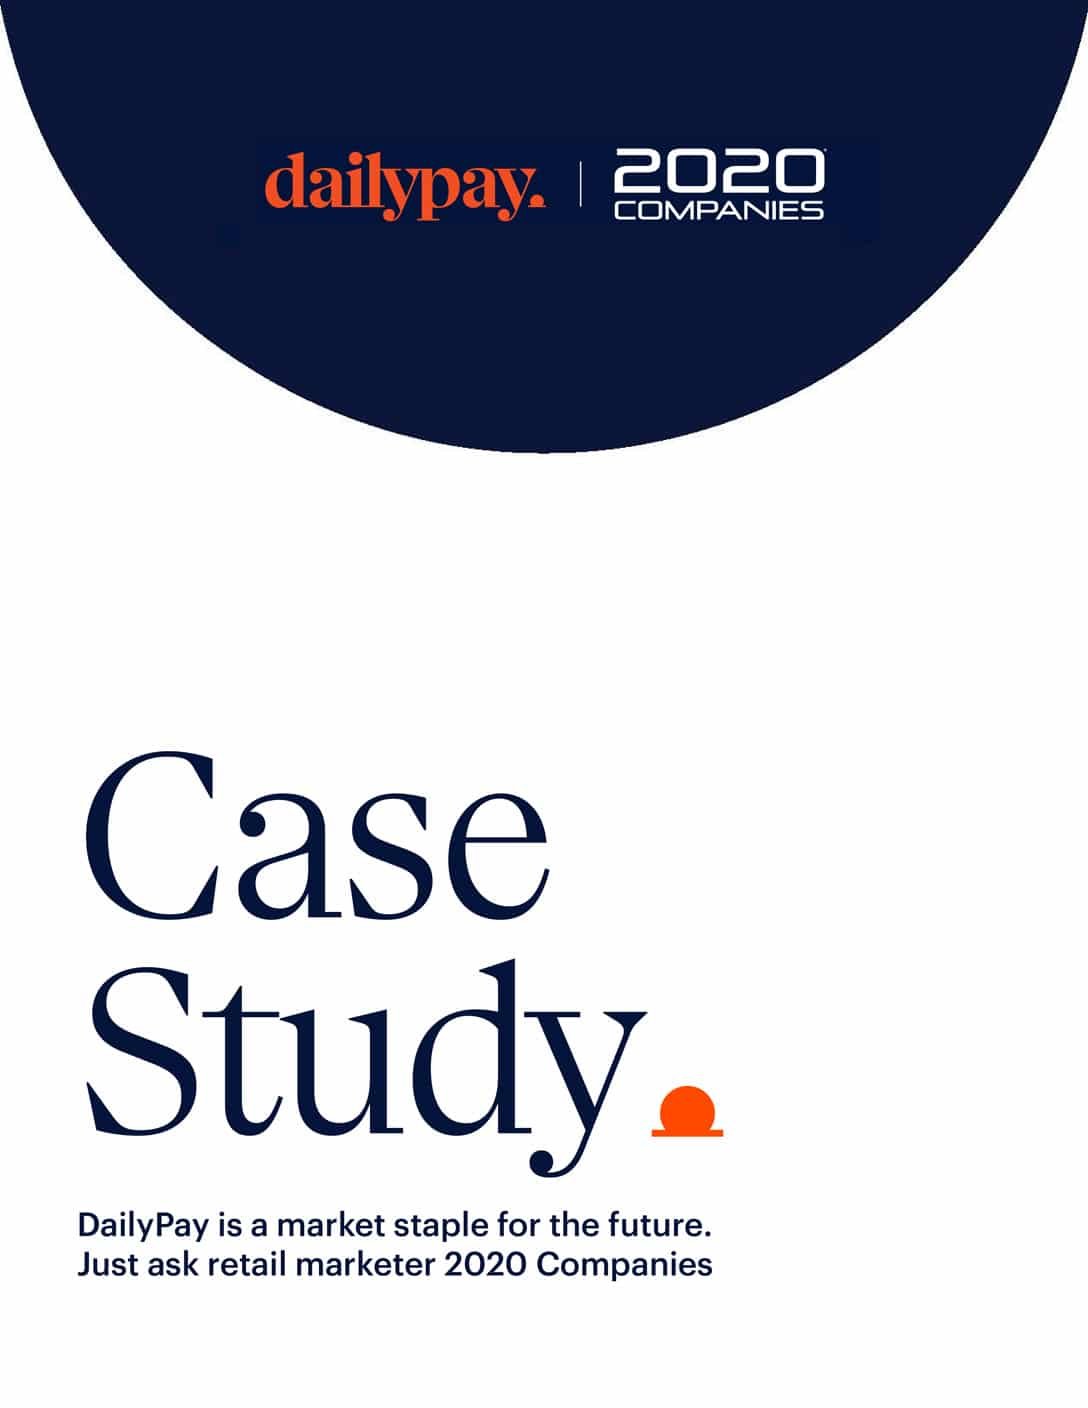 A promotional graphic features the logos for DailyPay and 2020 Companies at the top. Below, large text reads "Case Study." A smaller text underneath states, "DailyPay is a market staple for the future. Just ask retail marketer 2020 Companies." The background is white.